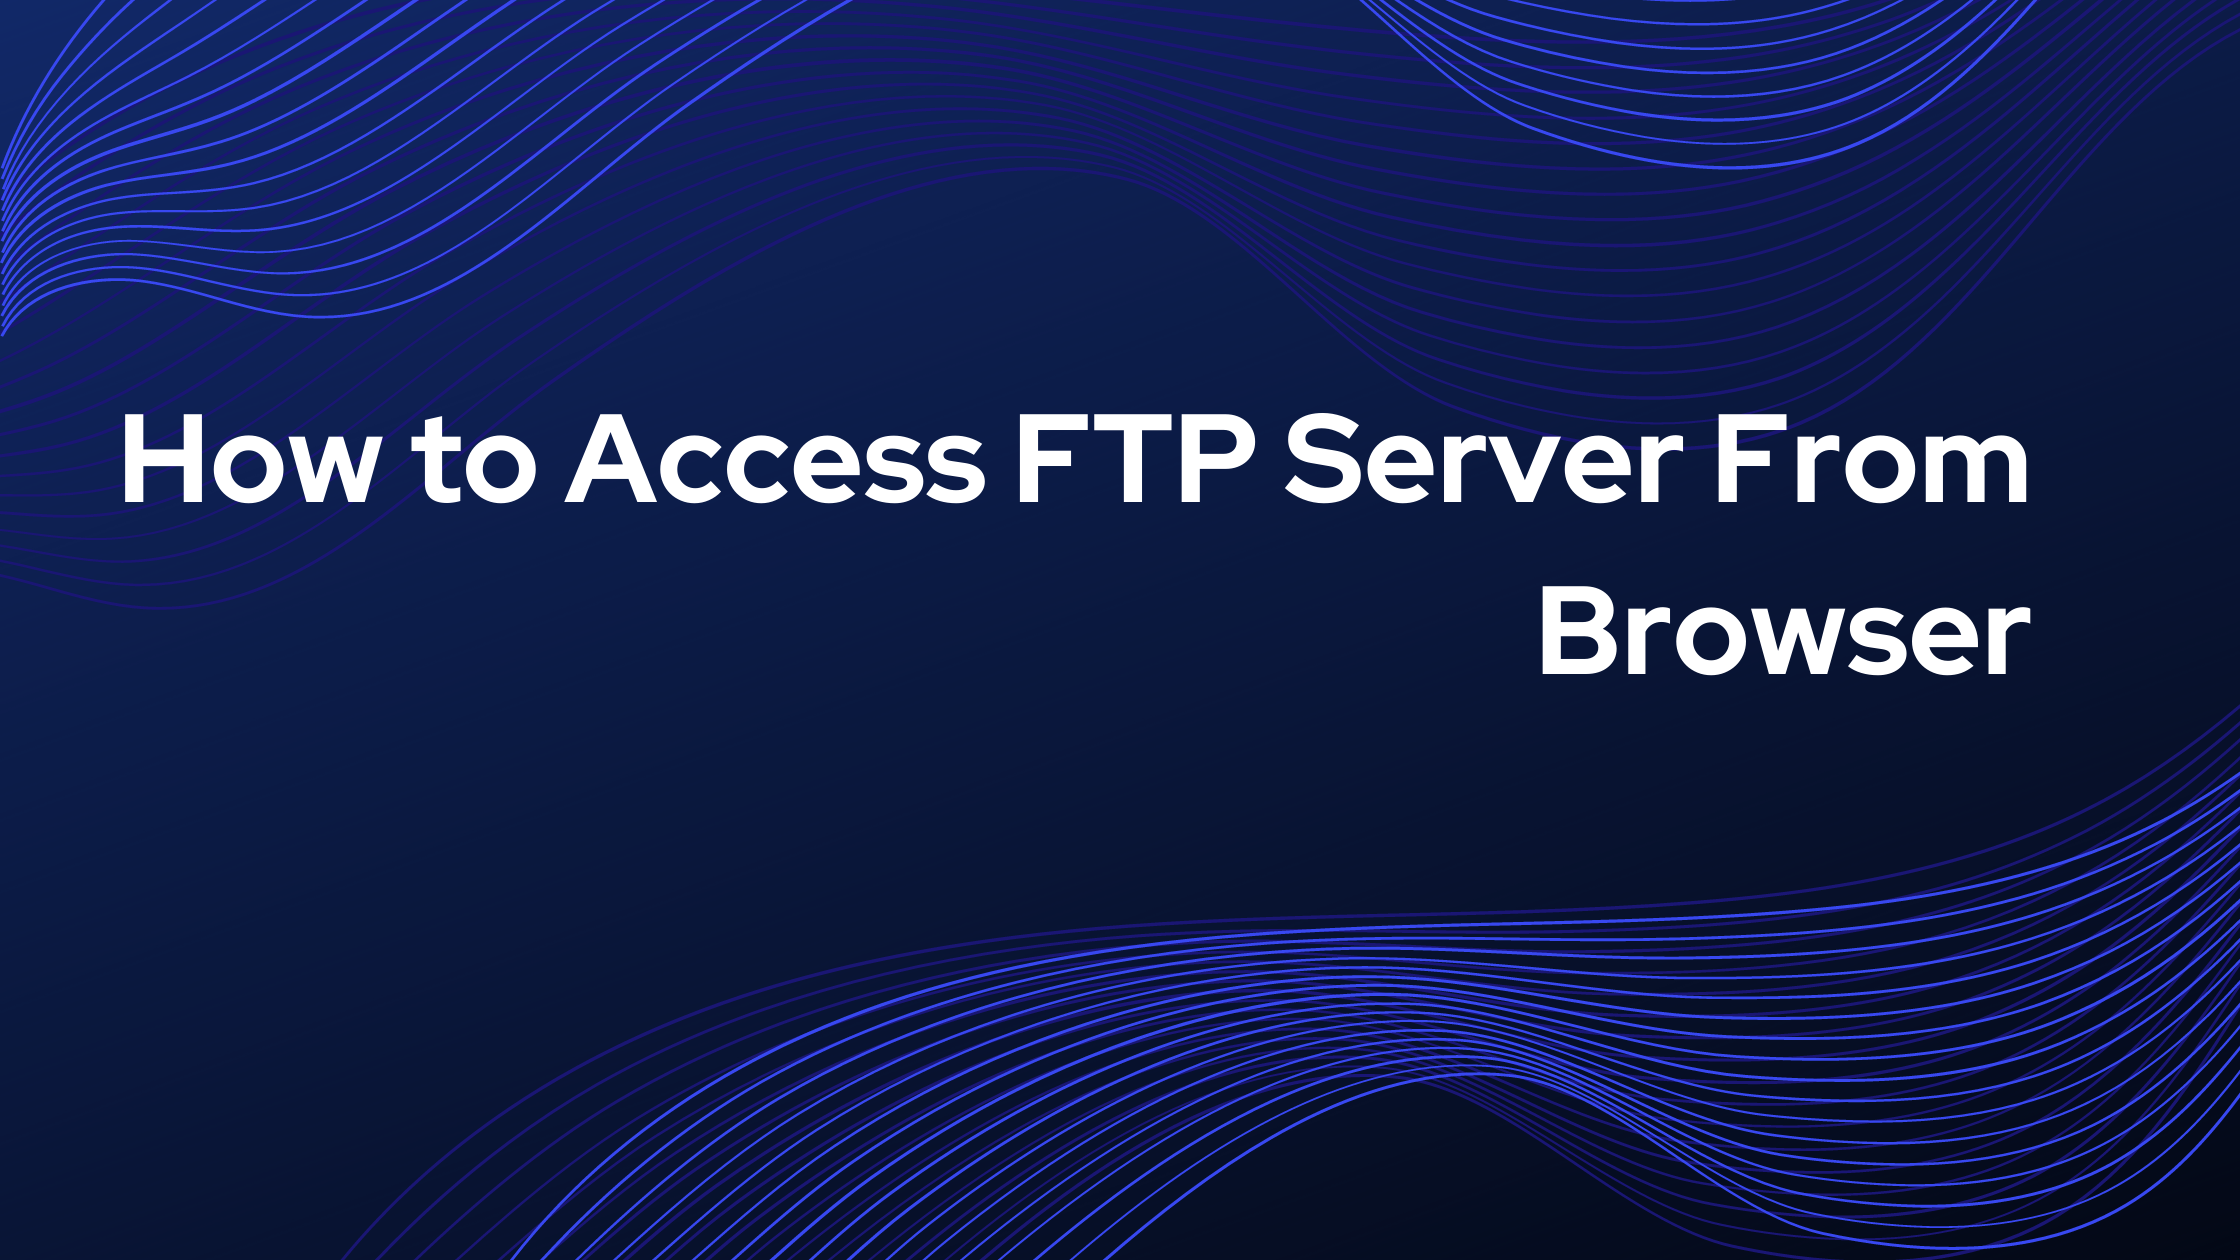 How to Access FTP Server From Browser?